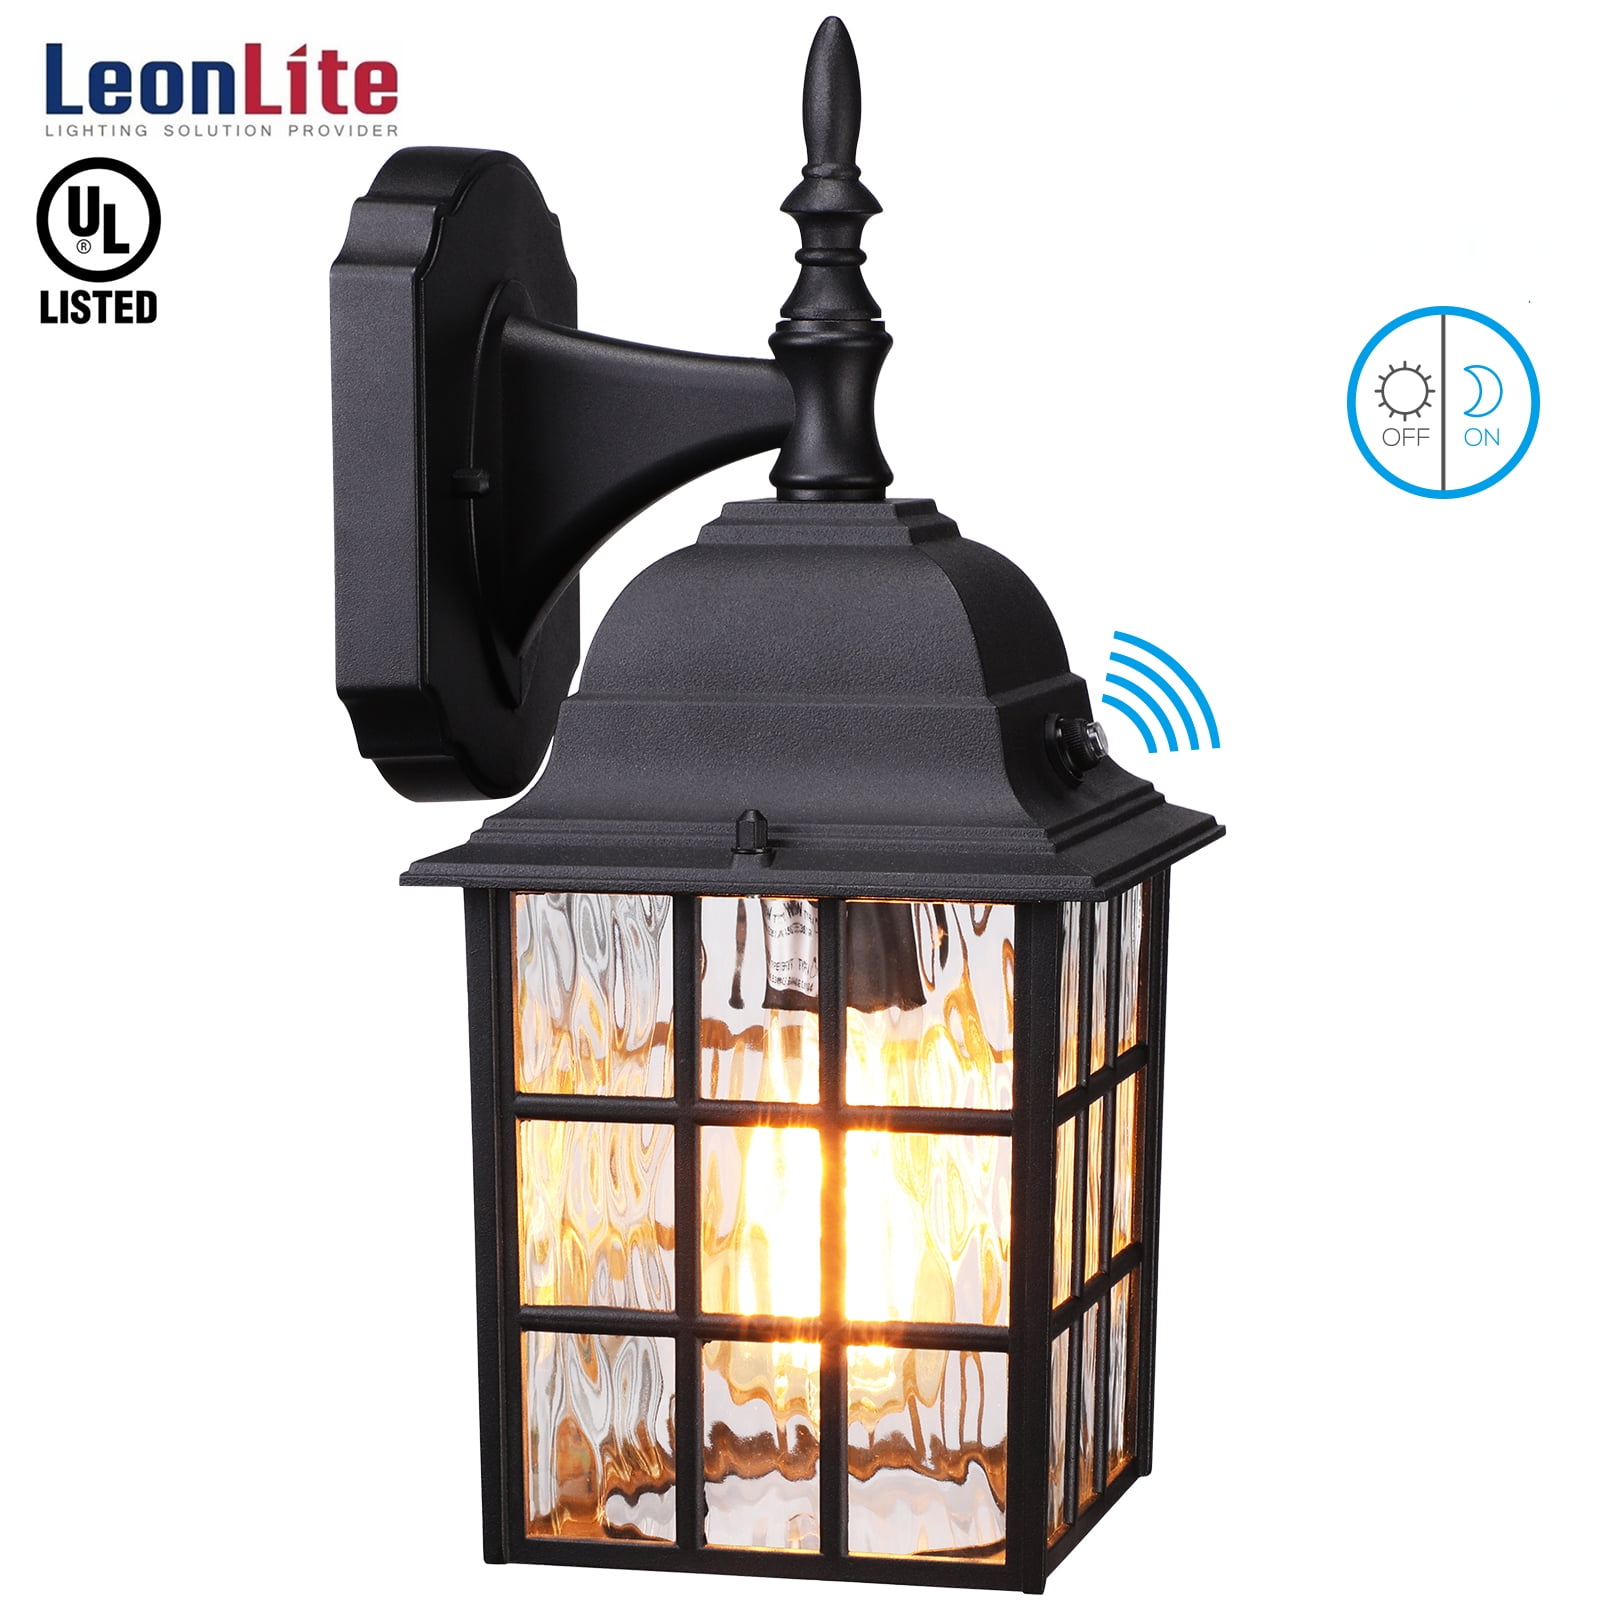 Outside Lights for House Porch Garage Black Wall Sconces Water Ripple Glass Dusk to Dawn Outdoor Wall Lights Exterior Light Fixture Photocell Wall Mount 2-Pack Motion Sensor Outdoor Wall Lanterns